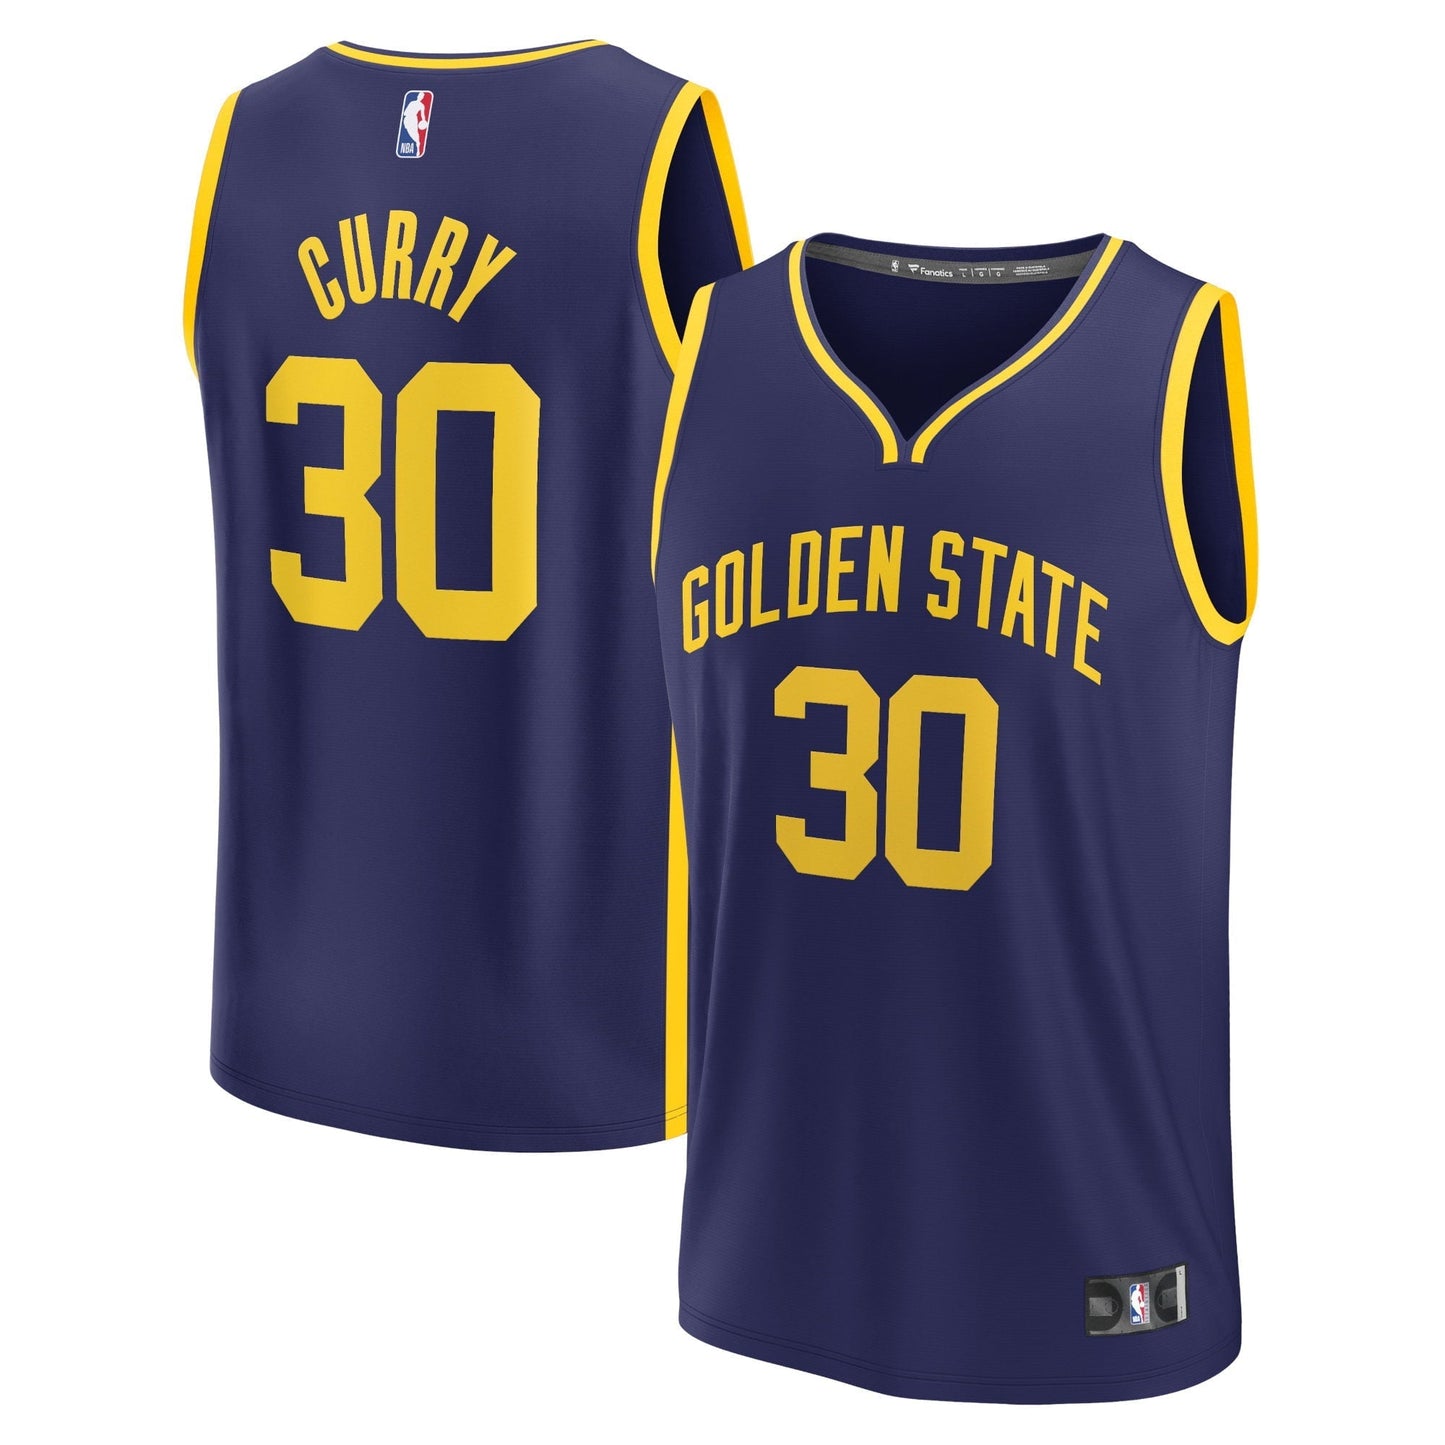 Youth Fanatics Branded Stephen Curry Navy Golden State Warriors Fast Break Player Jersey - Statement Edition